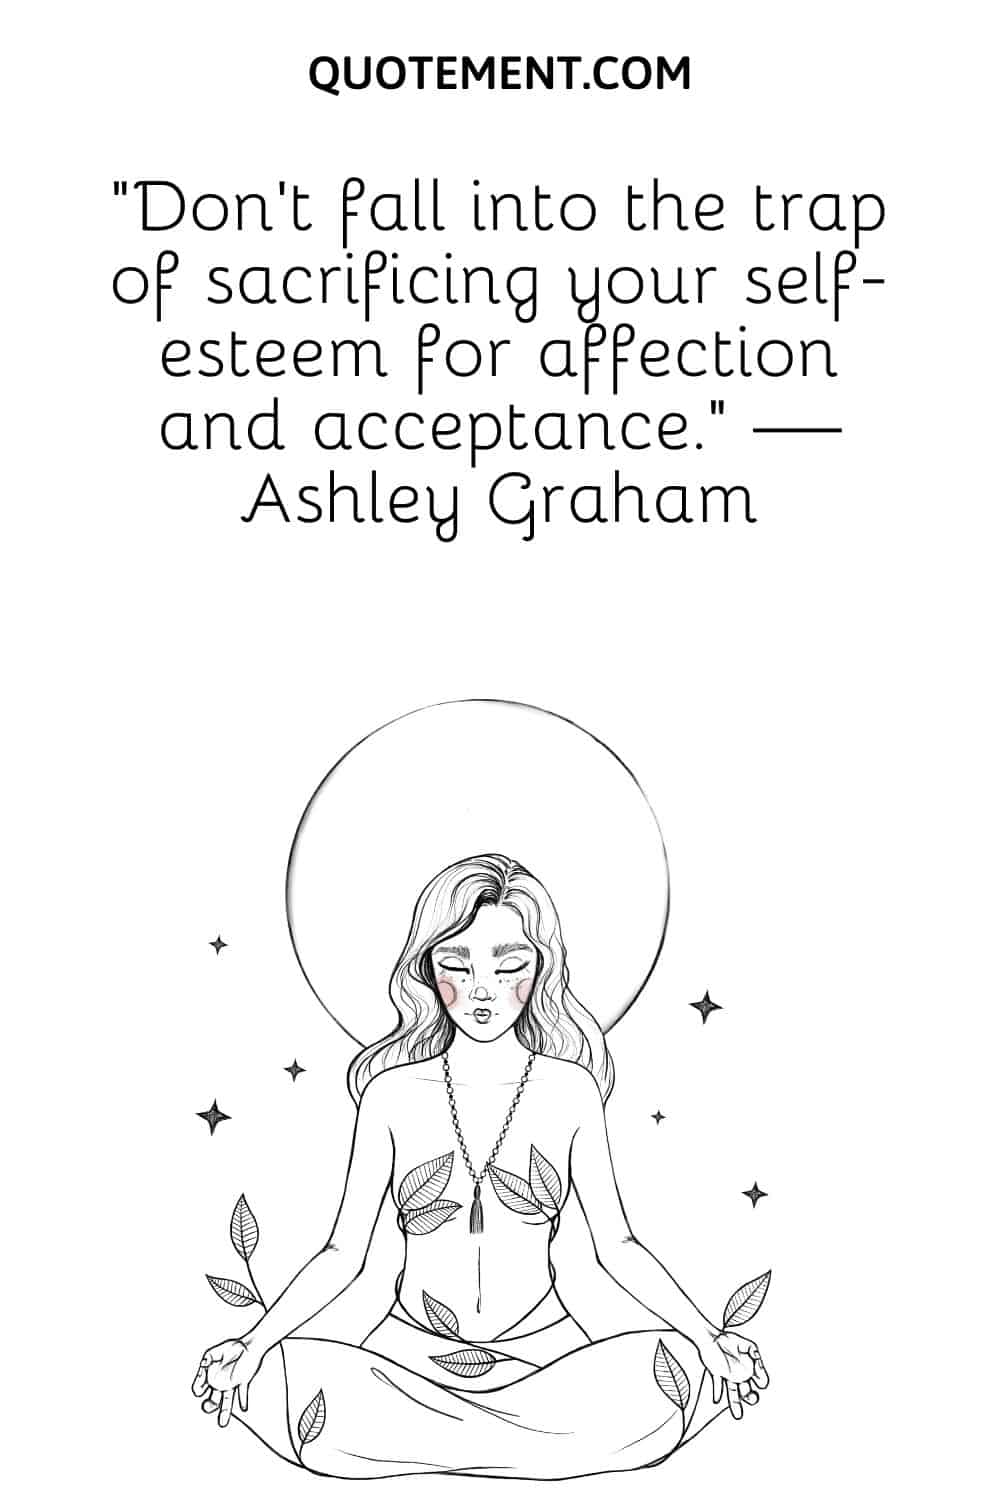 Don’t fall into the trap of sacrificing your self-esteem for affection and acceptance